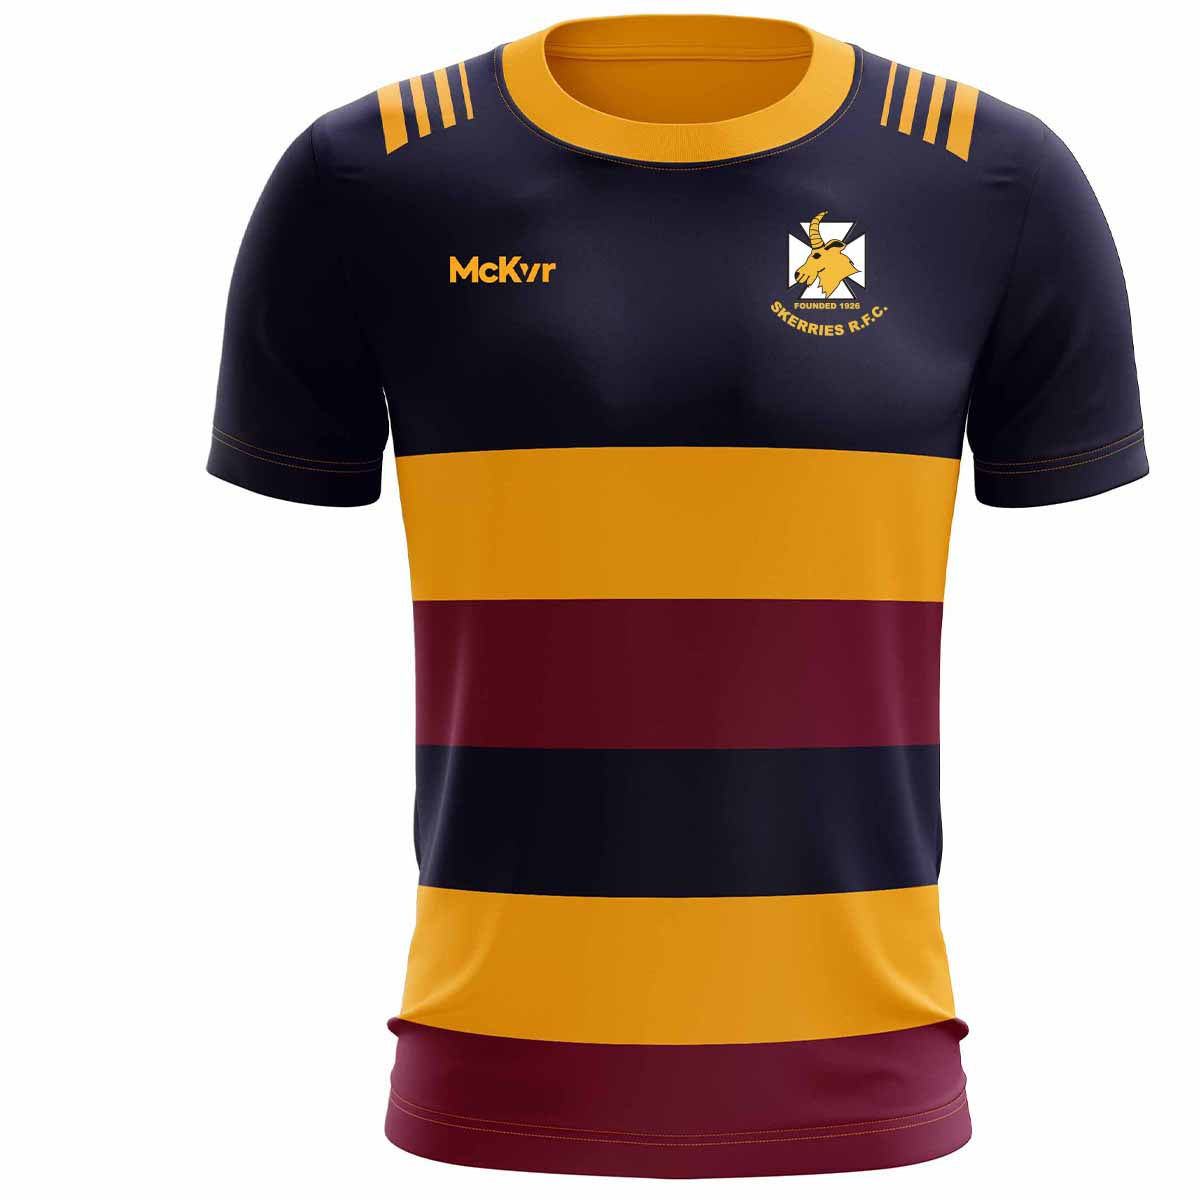 Mc Keever Skerries RFC Playing Jersey - Youth - Navy/Maroon/Amber